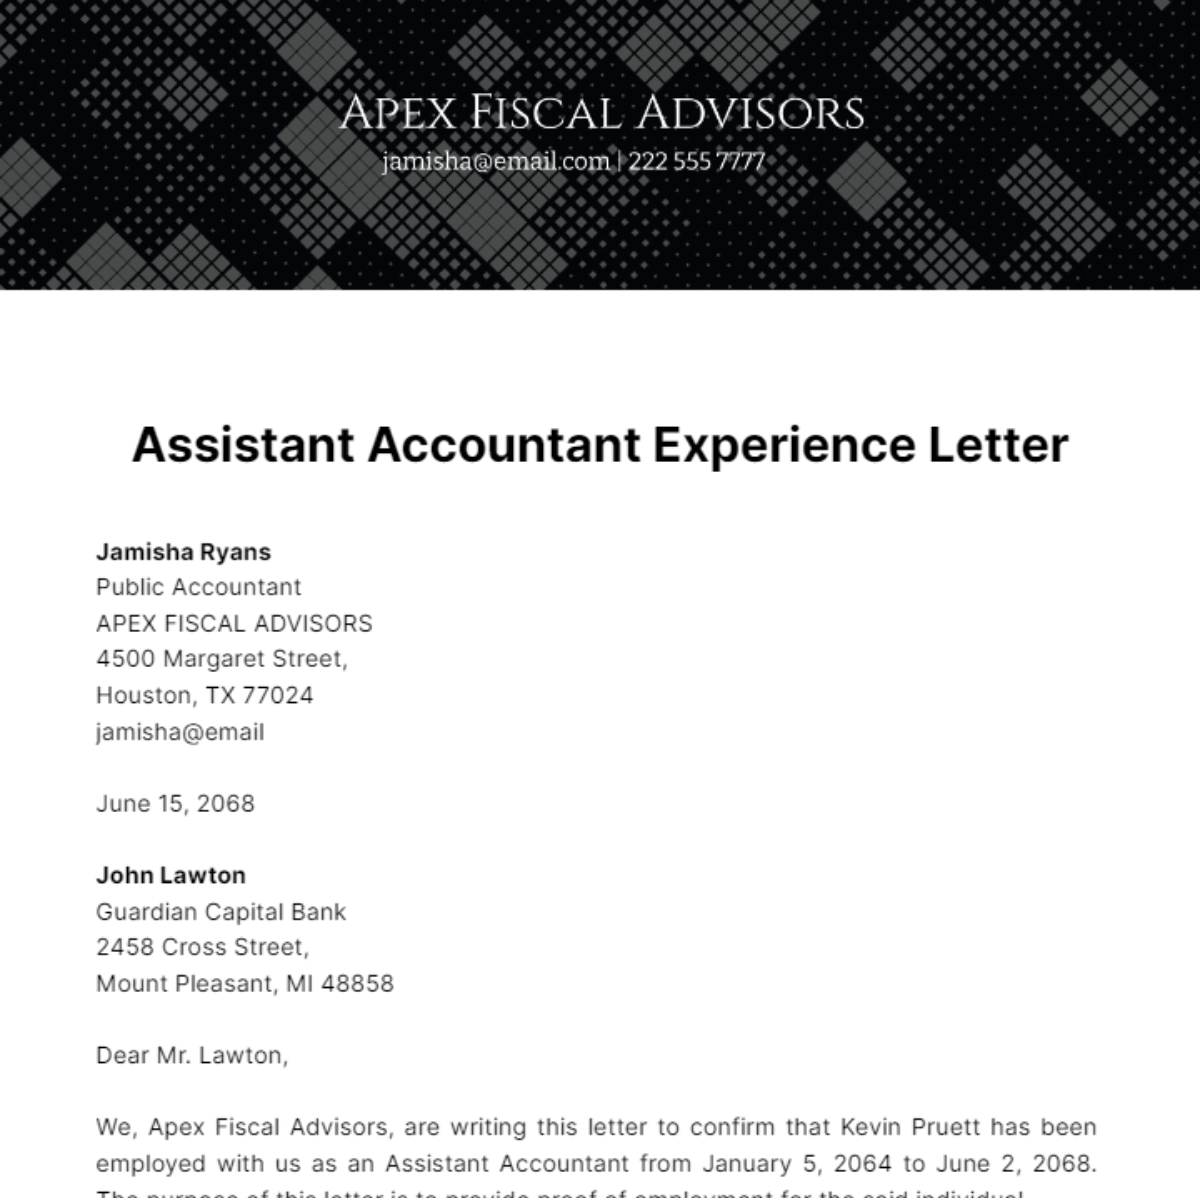 Assistant Accountant Experience Letter Template